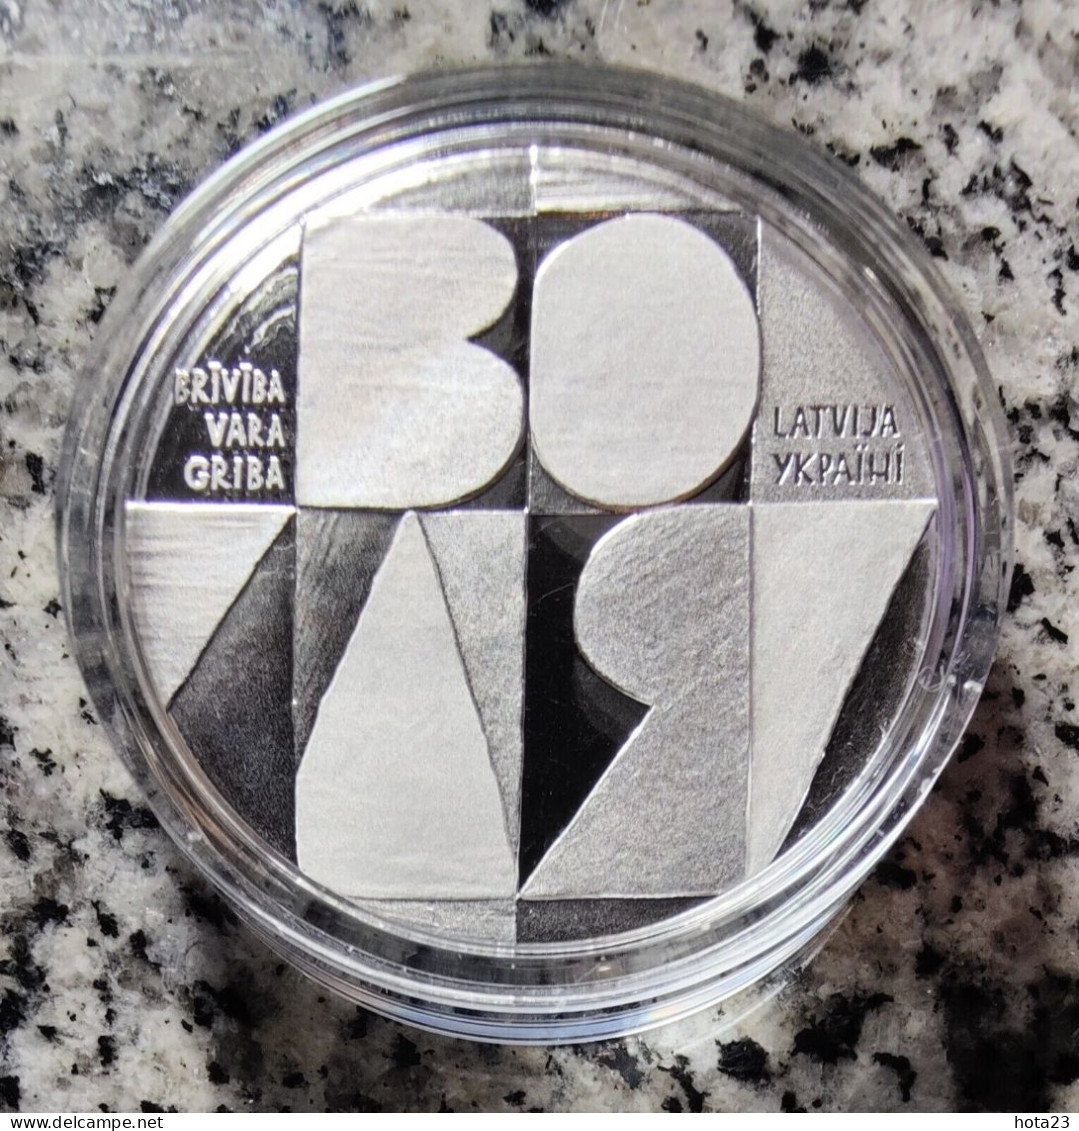 Latvia, Ukraine 5 Euro 2022 Silver Coin Fight For FREEDOM; WILL; POWER PROOF - Letonia